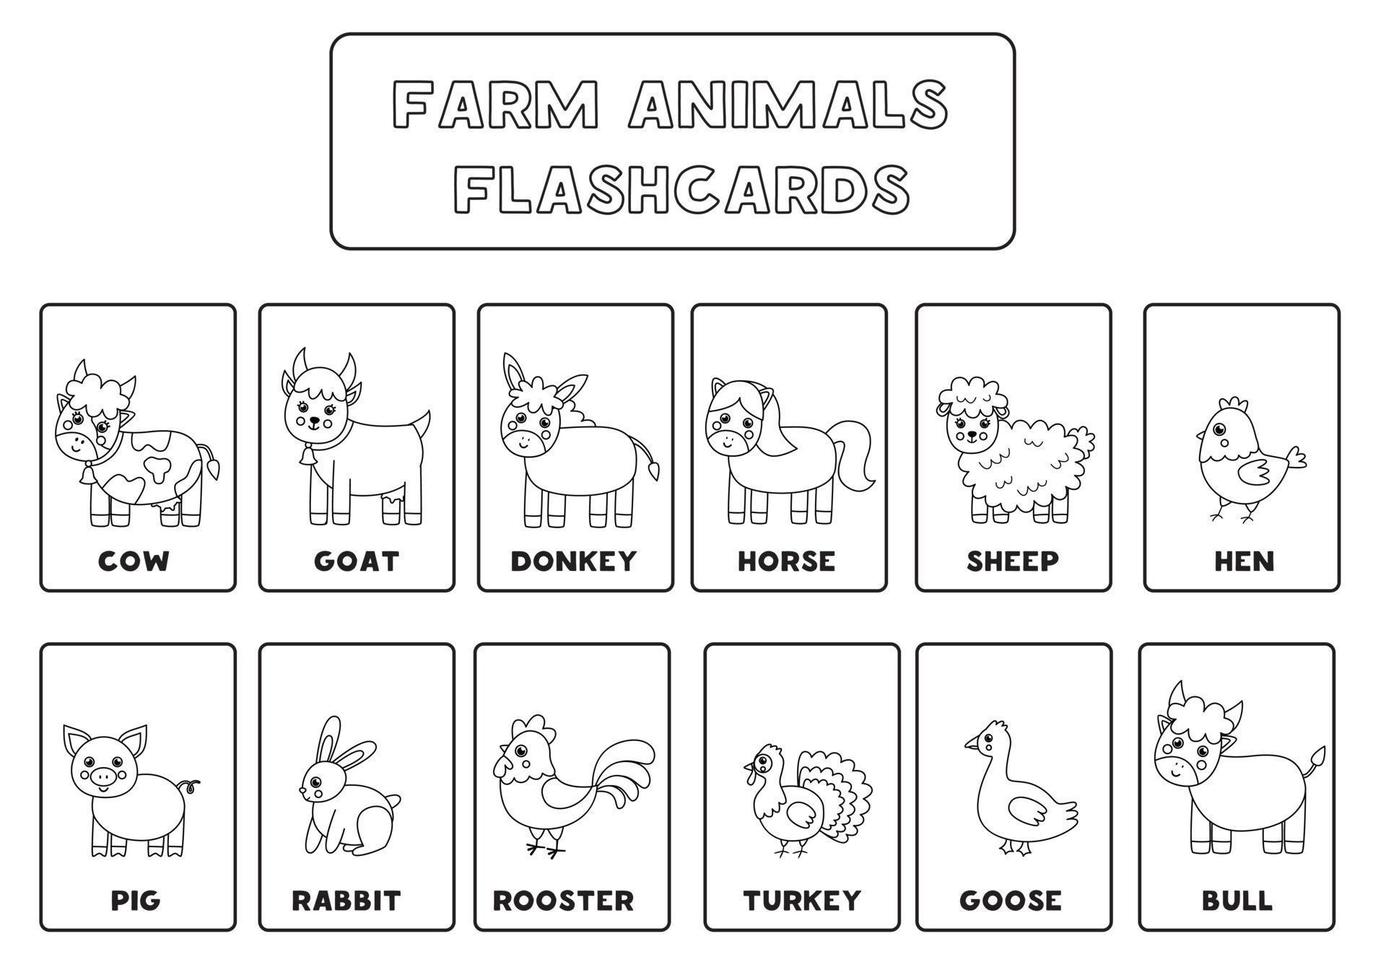 Black and white farm animal flashcards for kids. vector